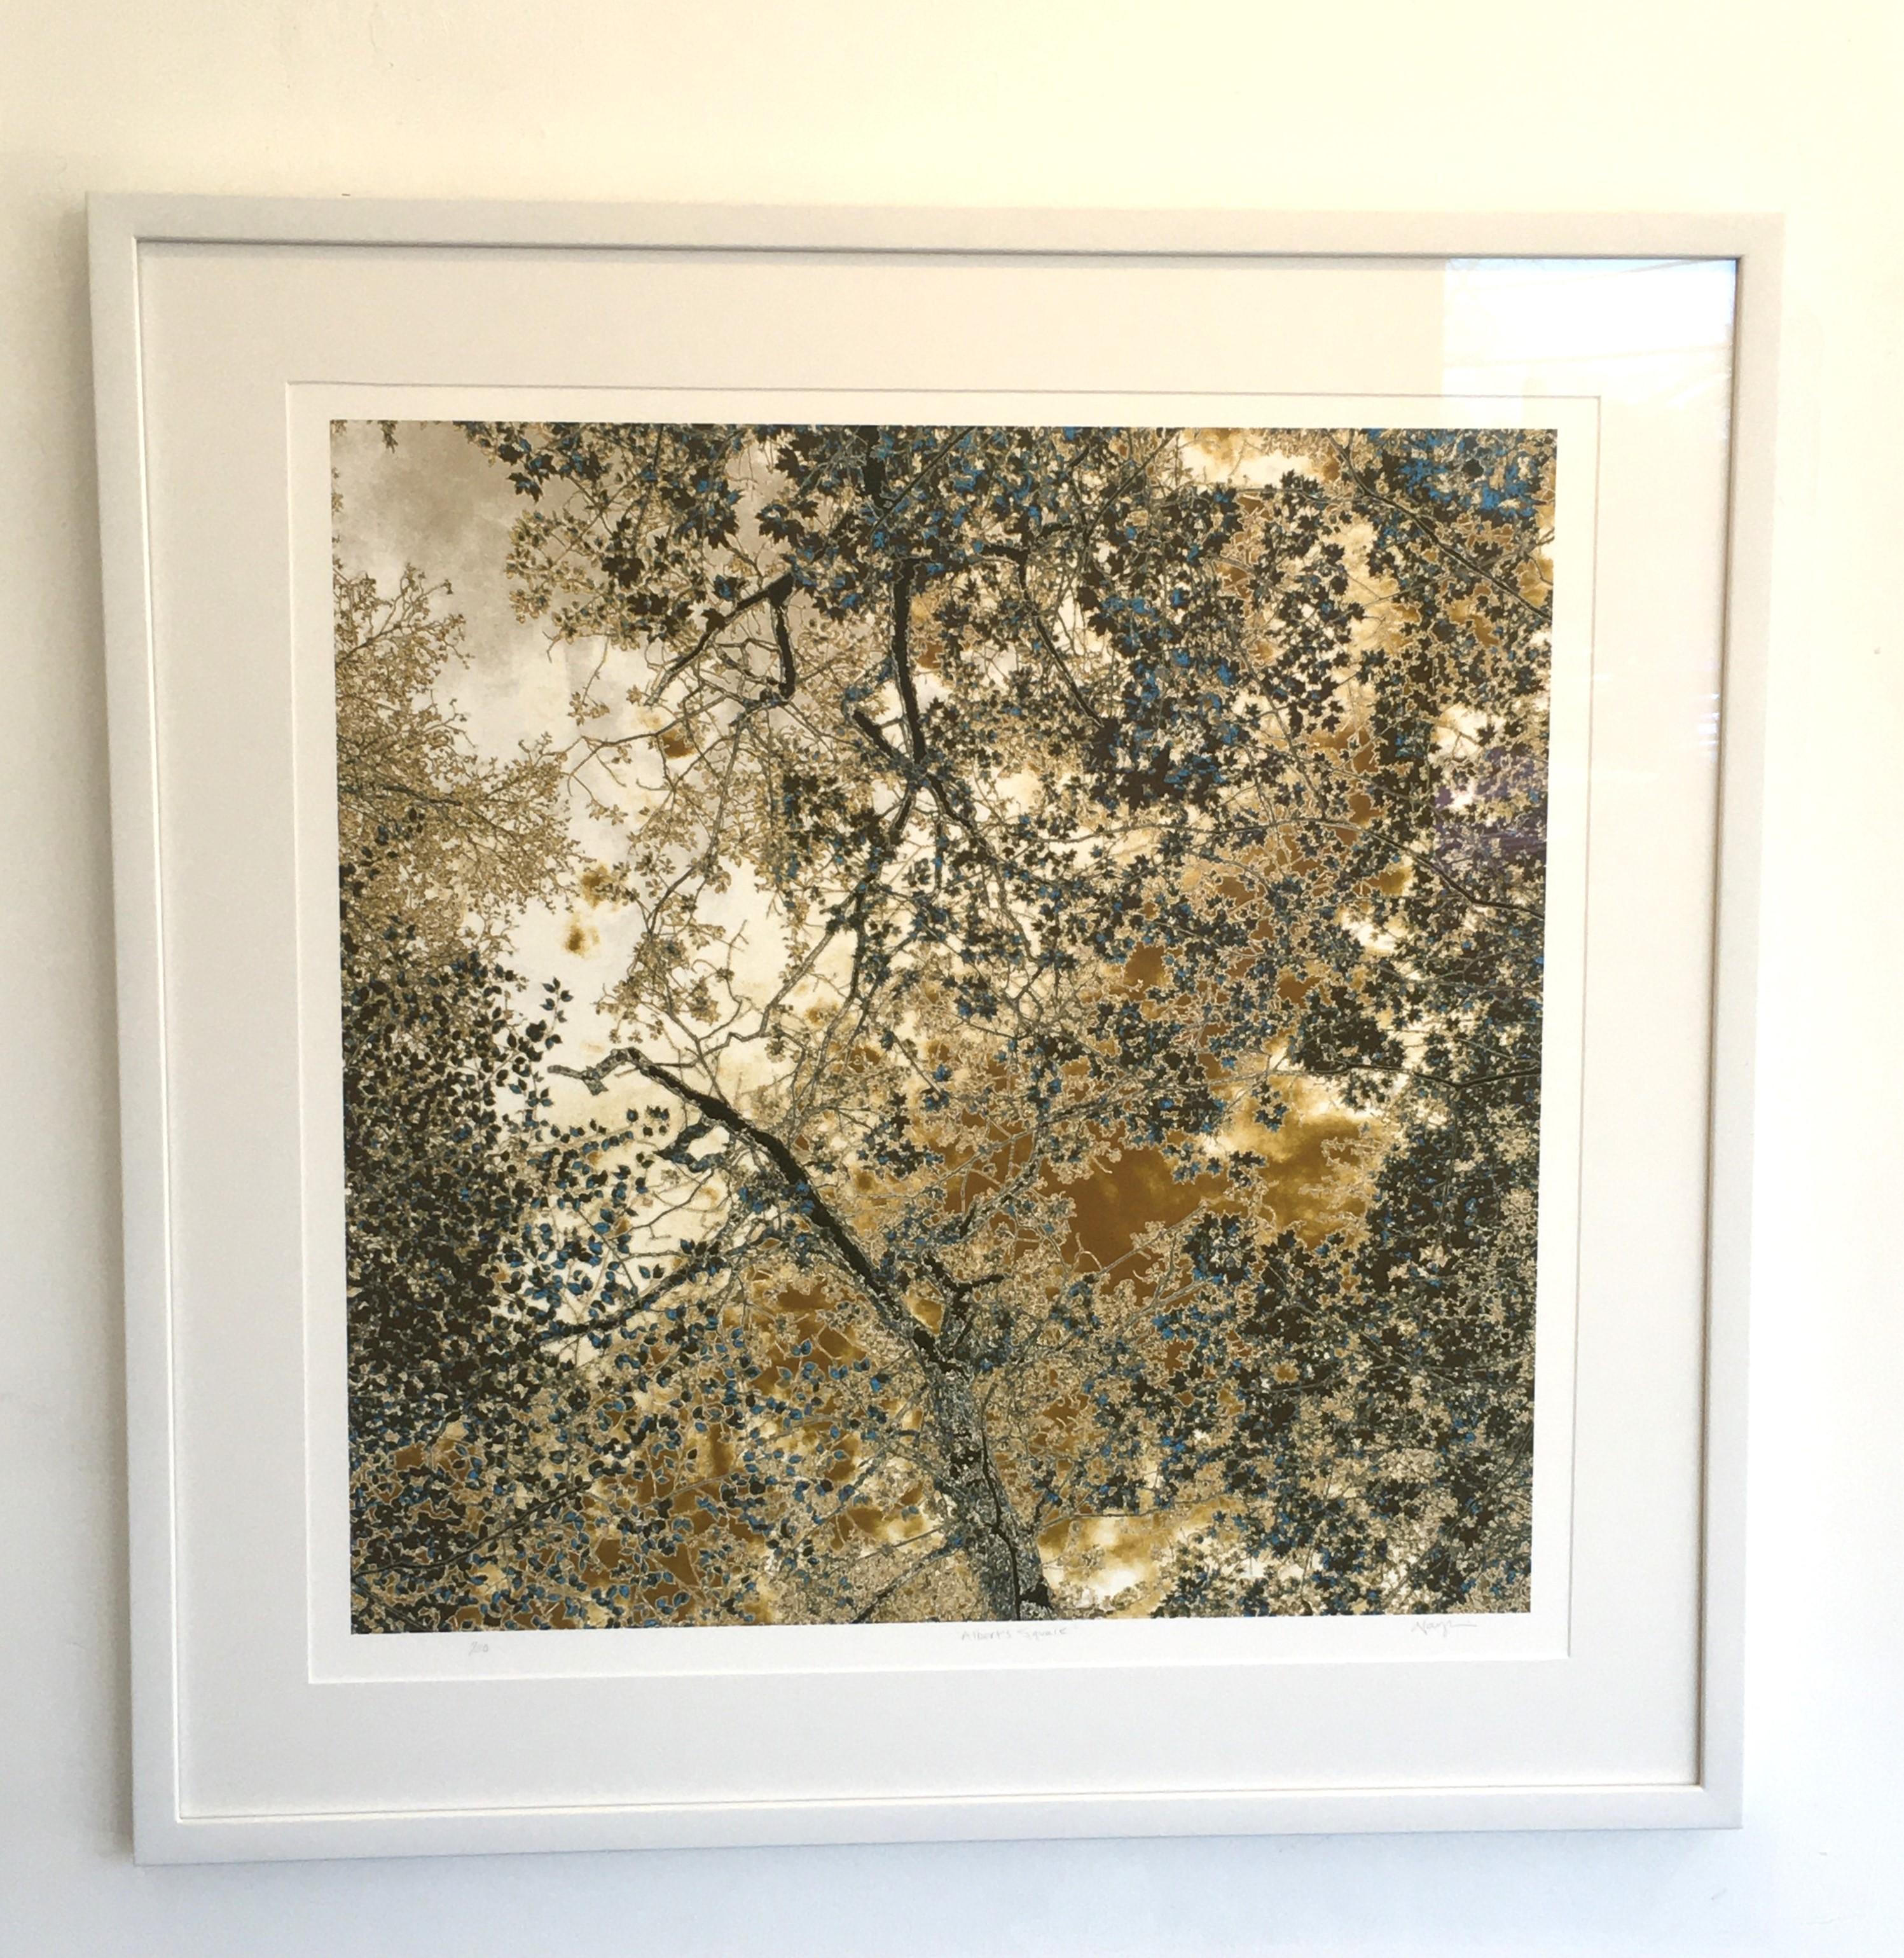 Albert's Square is a limited edition photograph by Nancy C. Woodward.  The is an archival print, 24x24, framed to 33x33.  It is signed and numbered.  It is filled with Gold, White and Brown colors.   It is $1,600.  This is an edition of 30.  It was